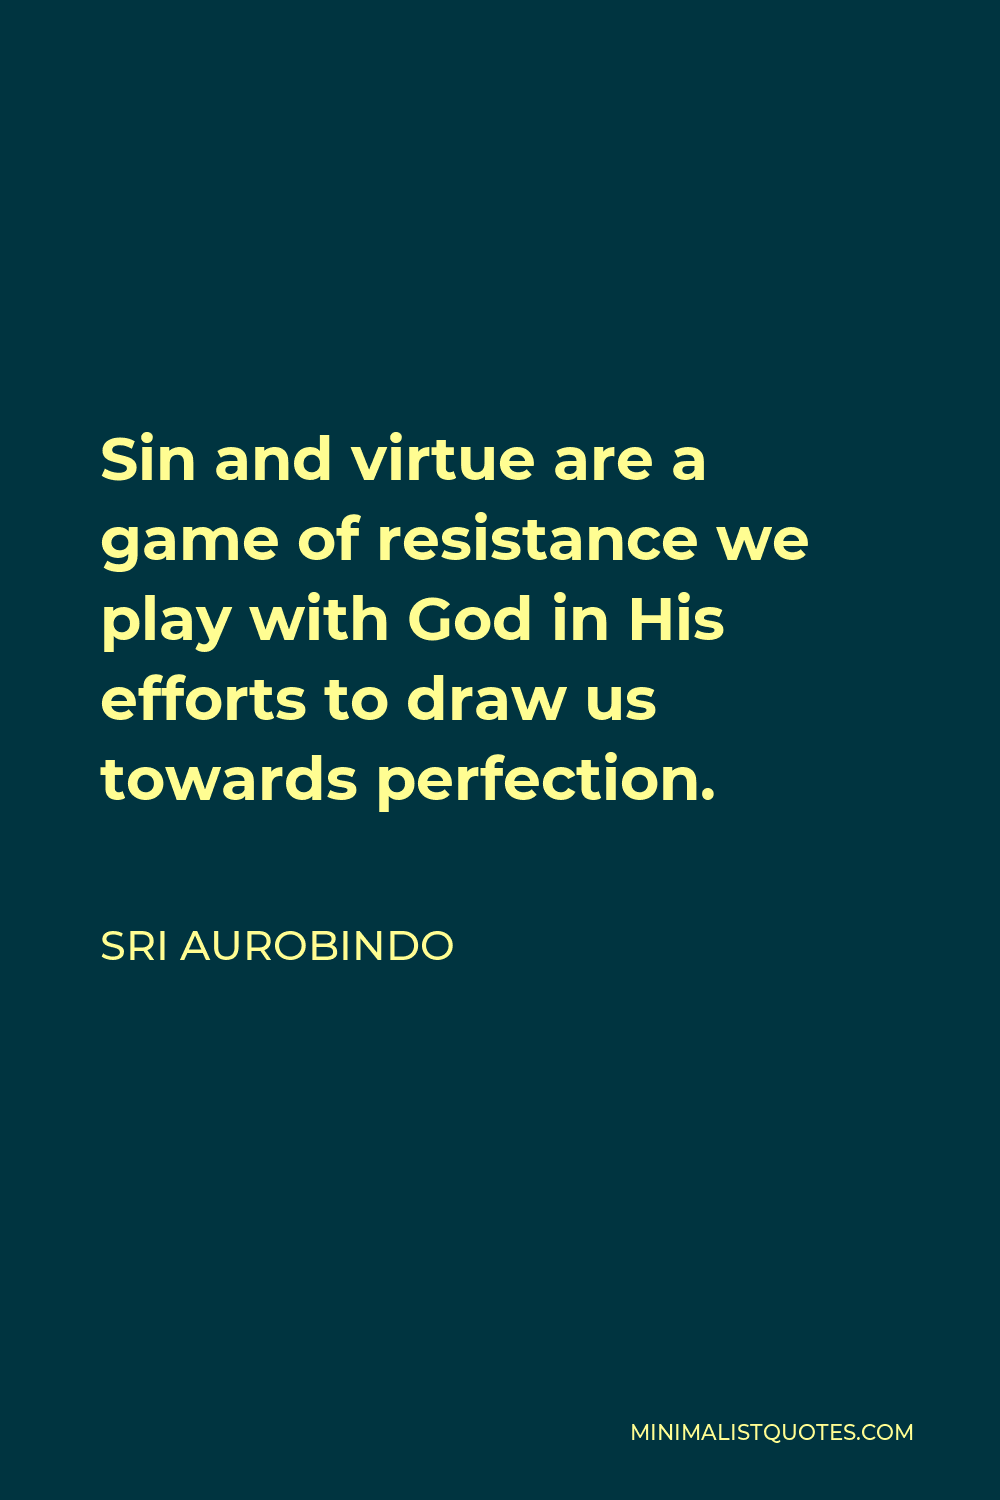 Sri Aurobindo Quote - Sin and virtue are a game of resistance we play with God in His efforts to draw us towards perfection.